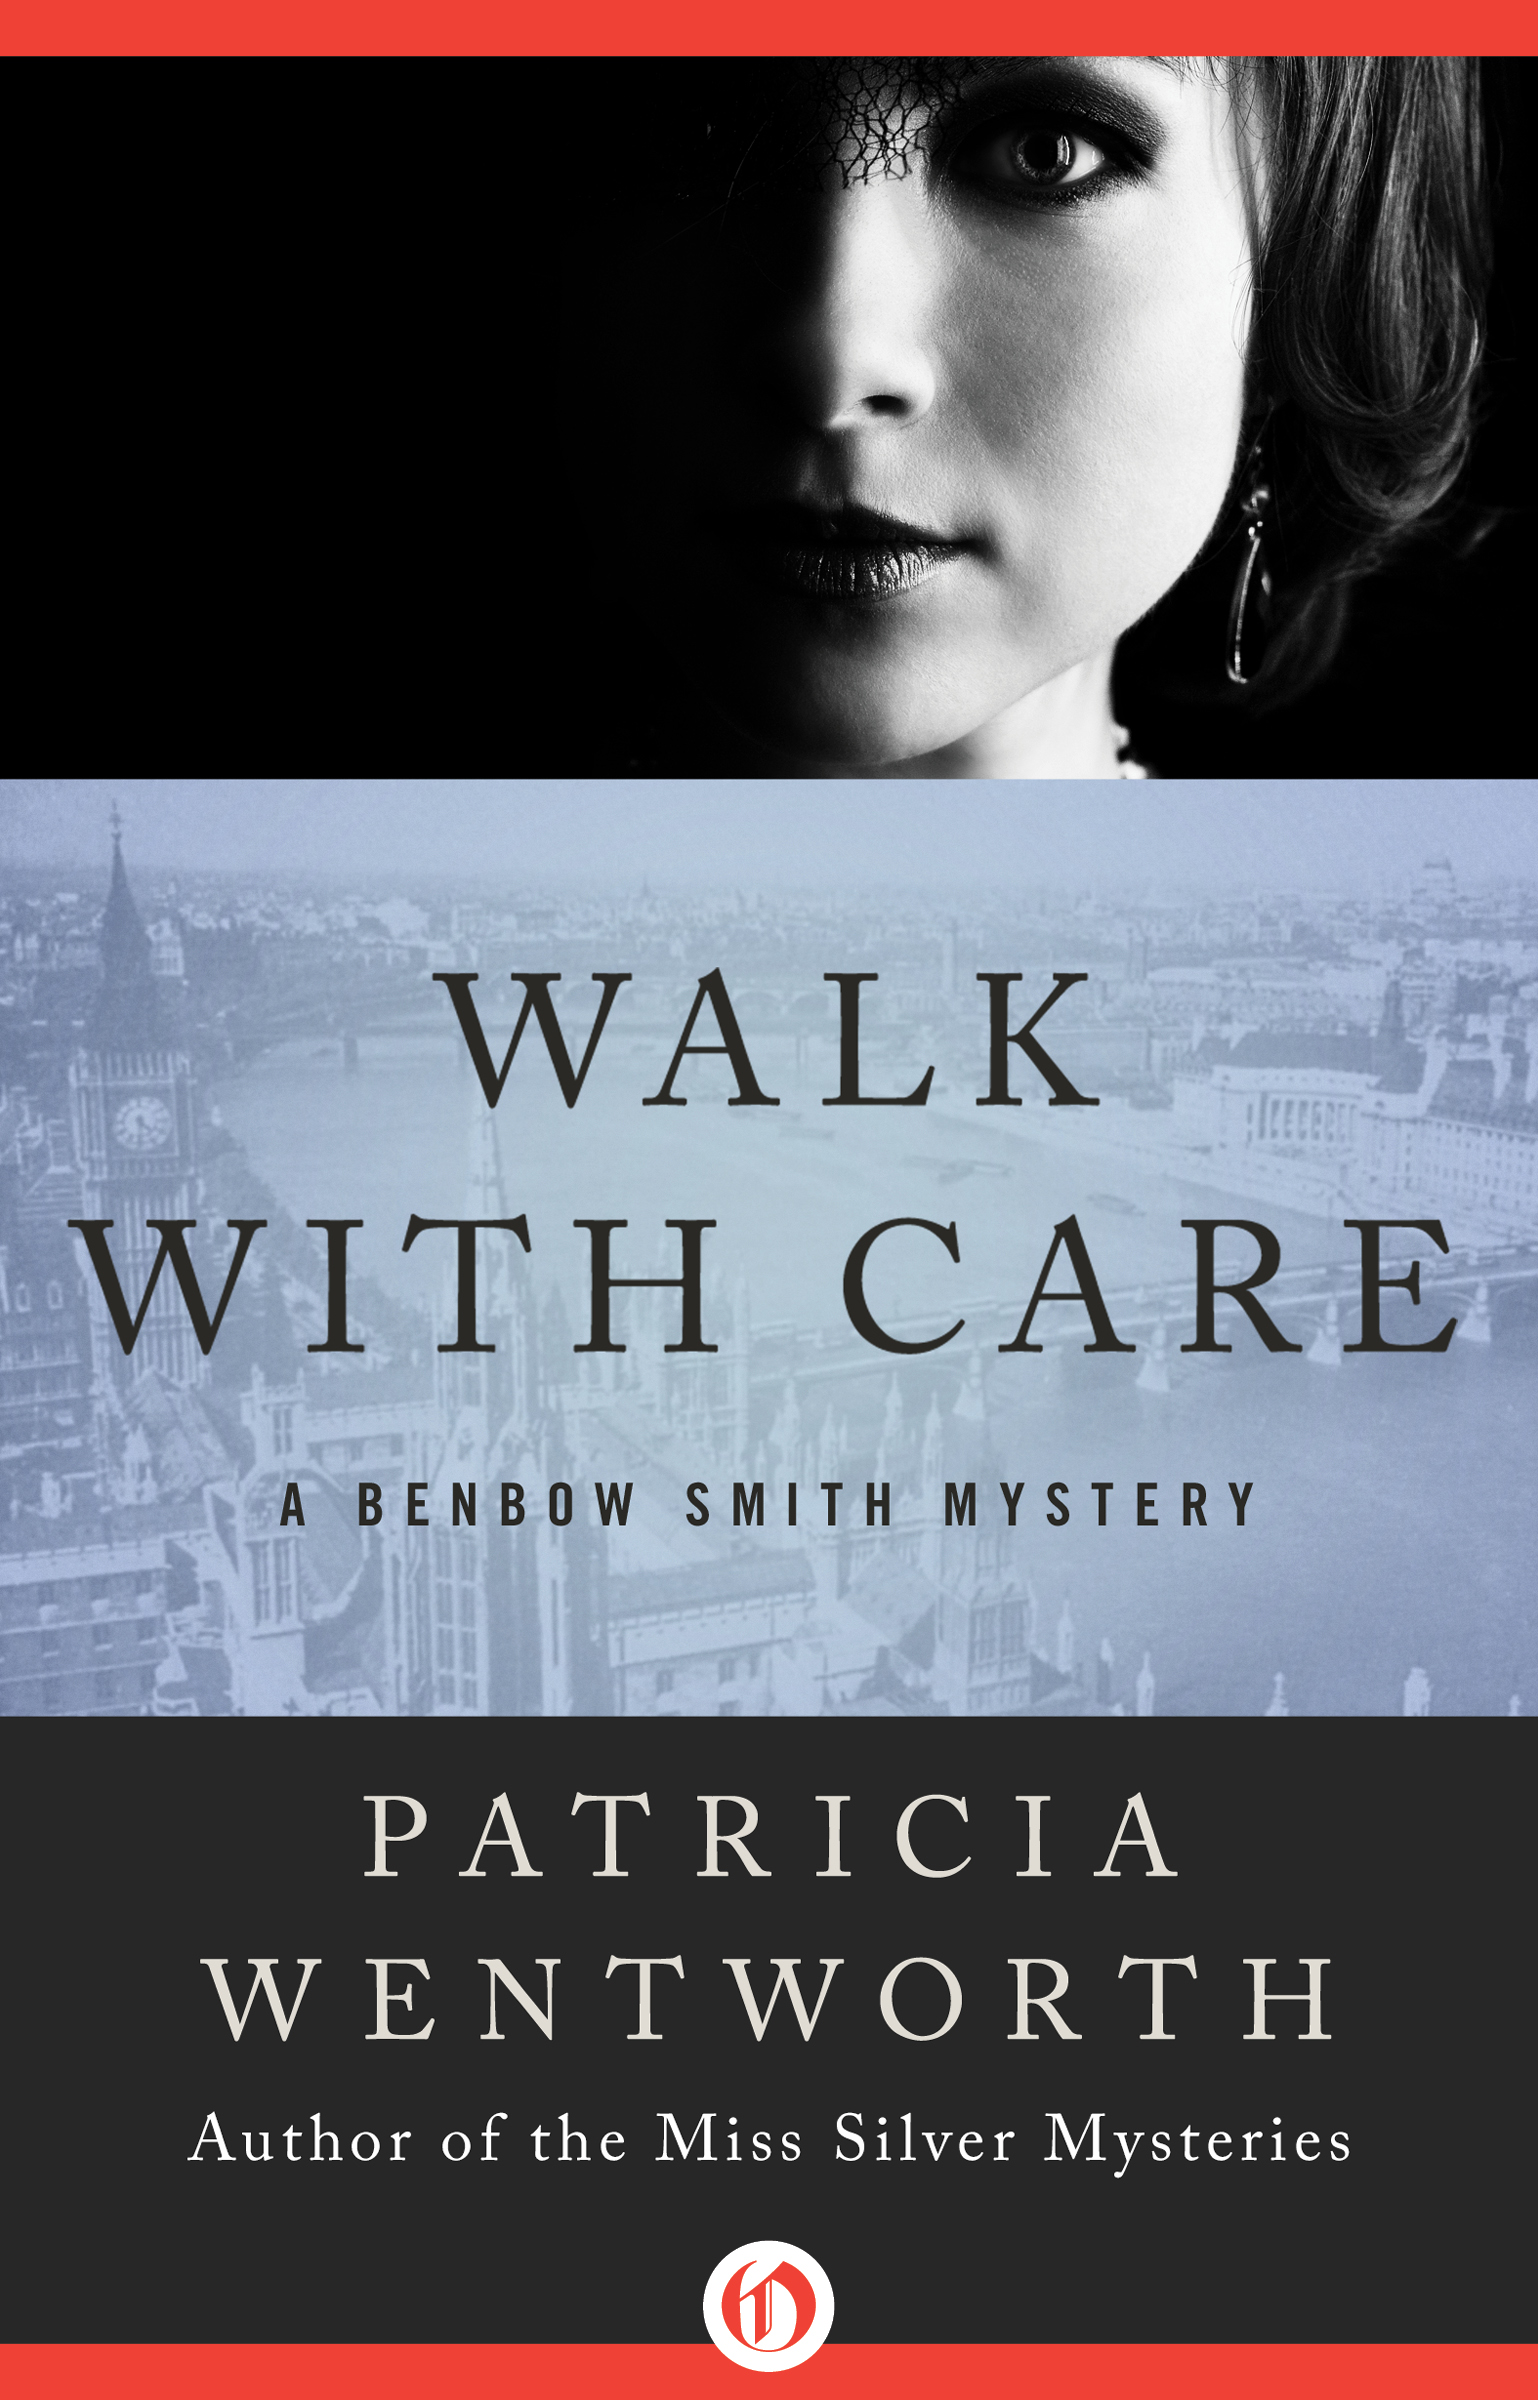 Walk with Care by Patricia Wentworth